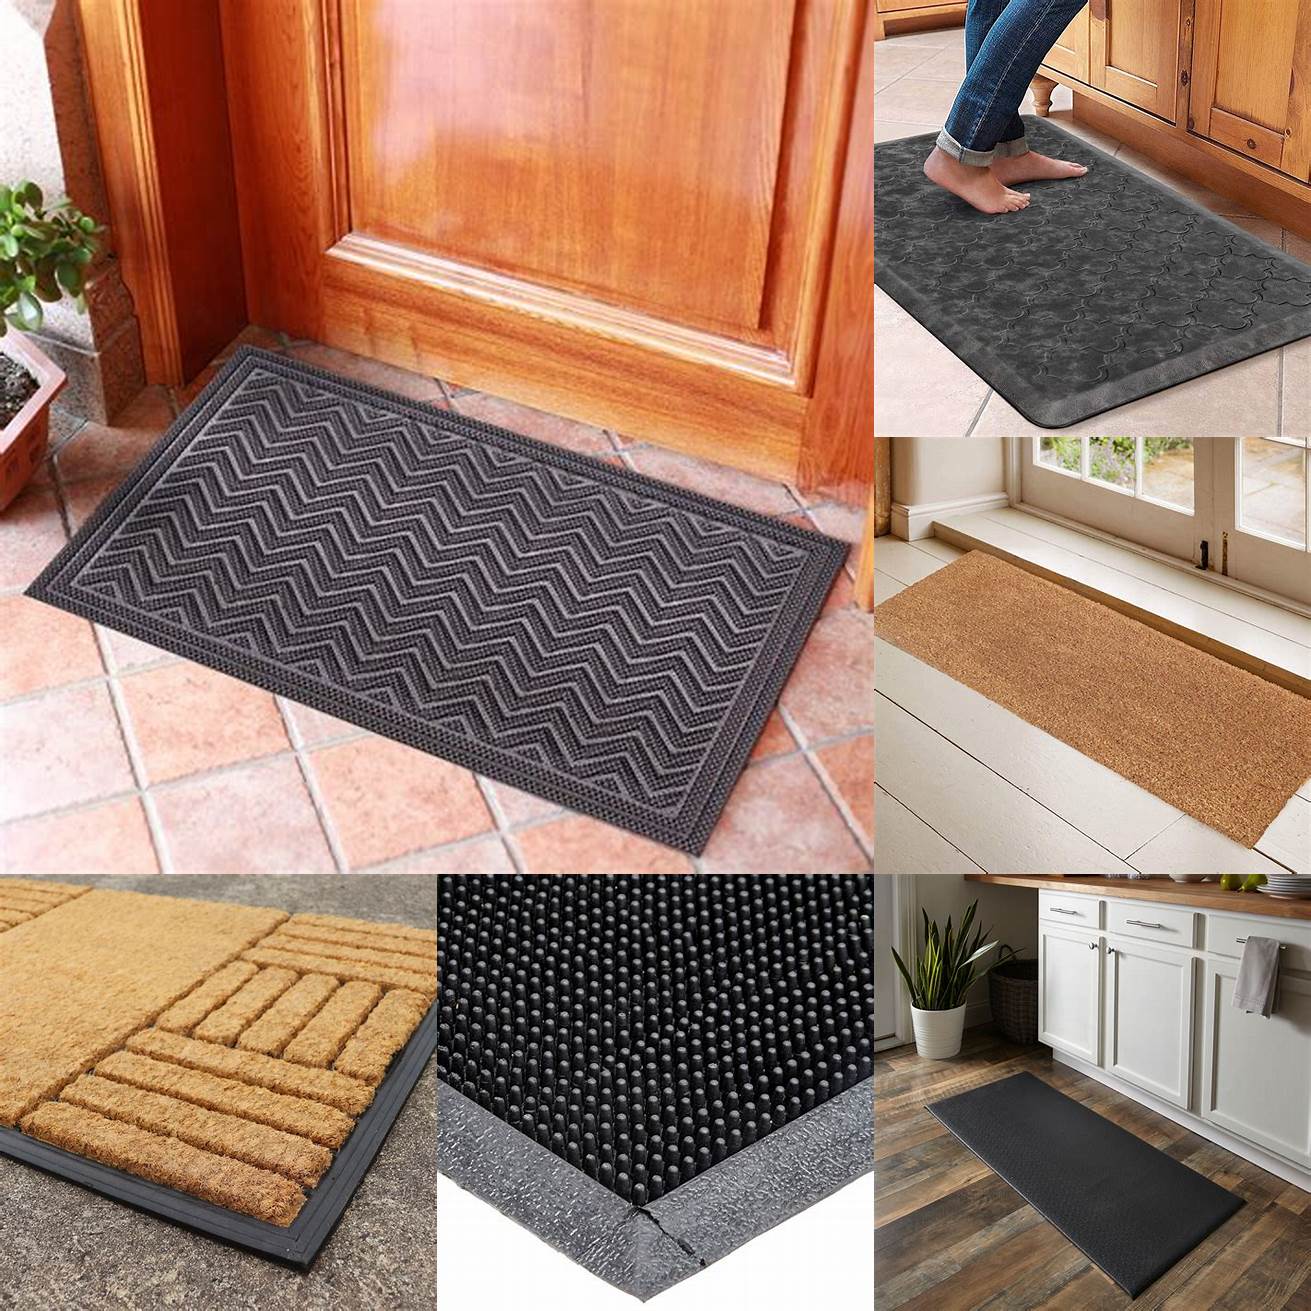 Durable - Look for a mat that is made of quality materials and can withstand high traffic